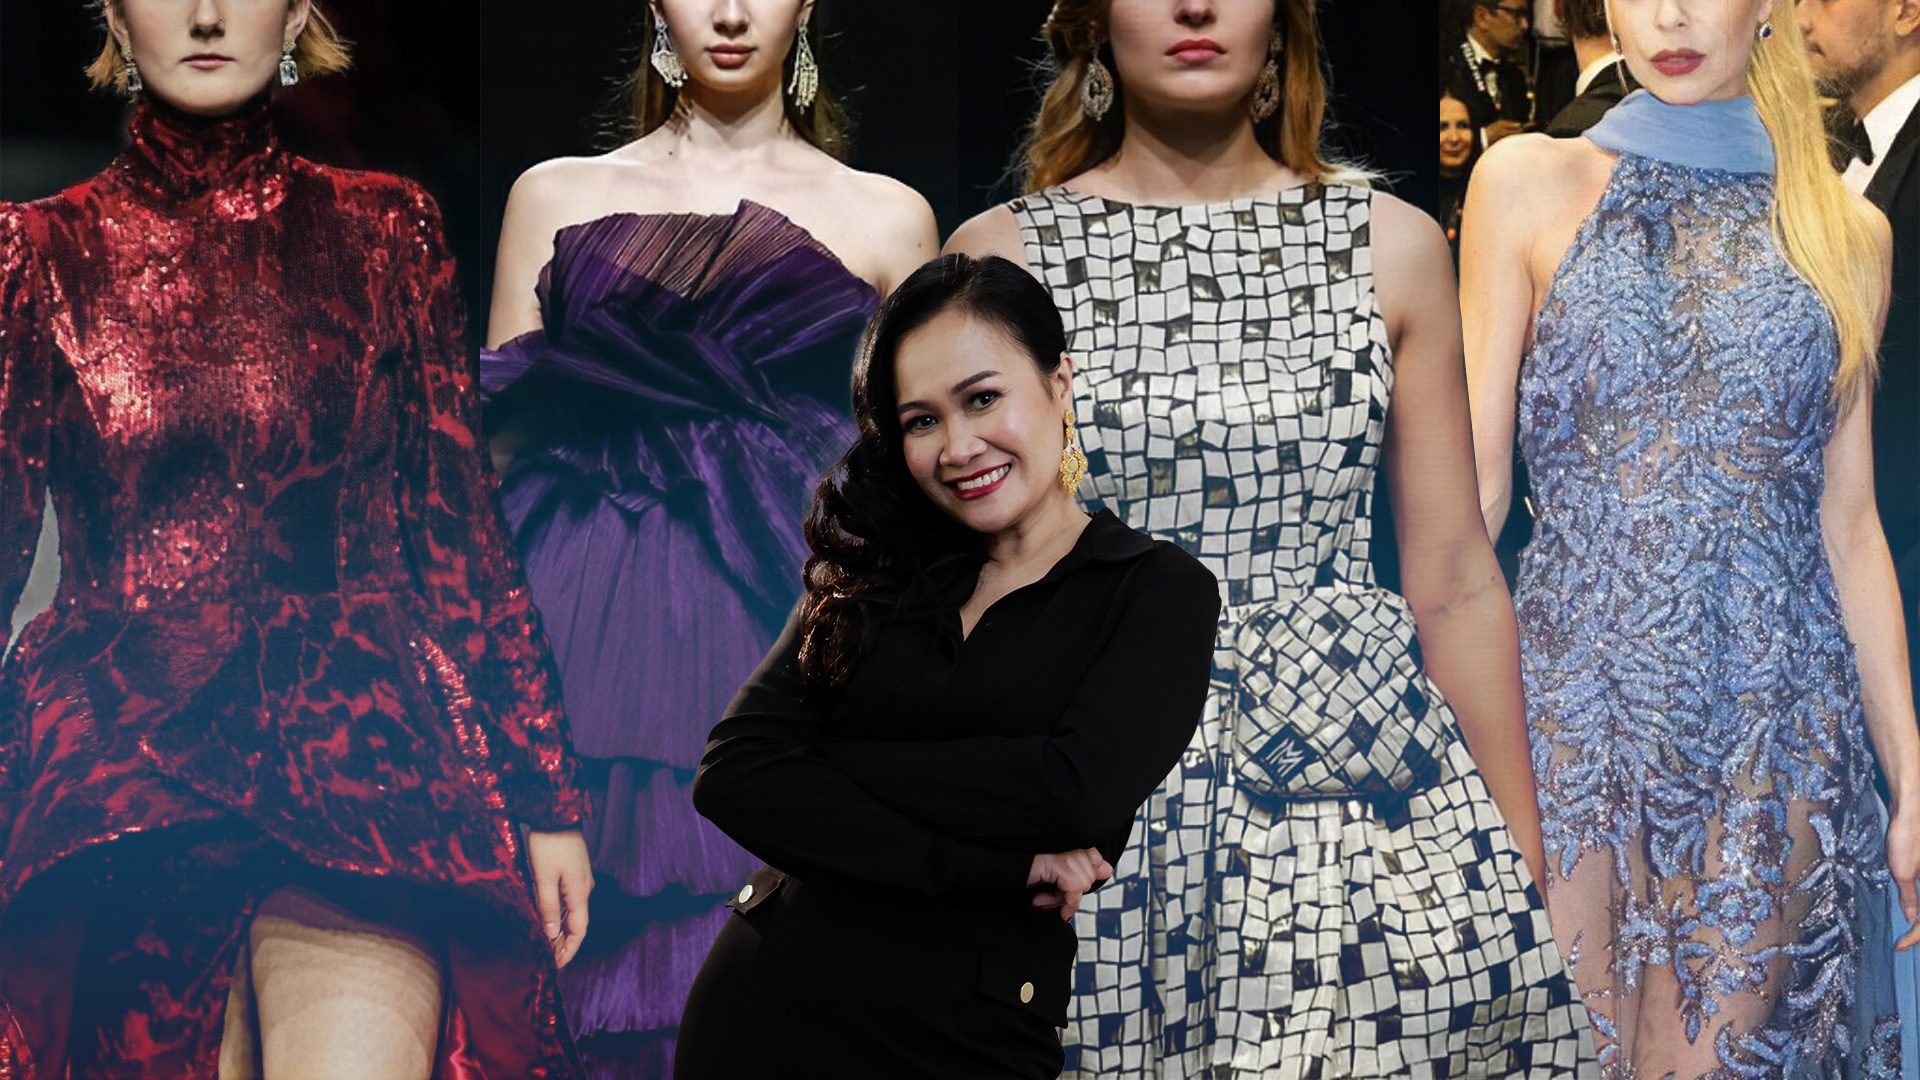 Meet Chona Bacaoco, the Filipina designer who dressed a Gucci heiress and other celebs at Cannes